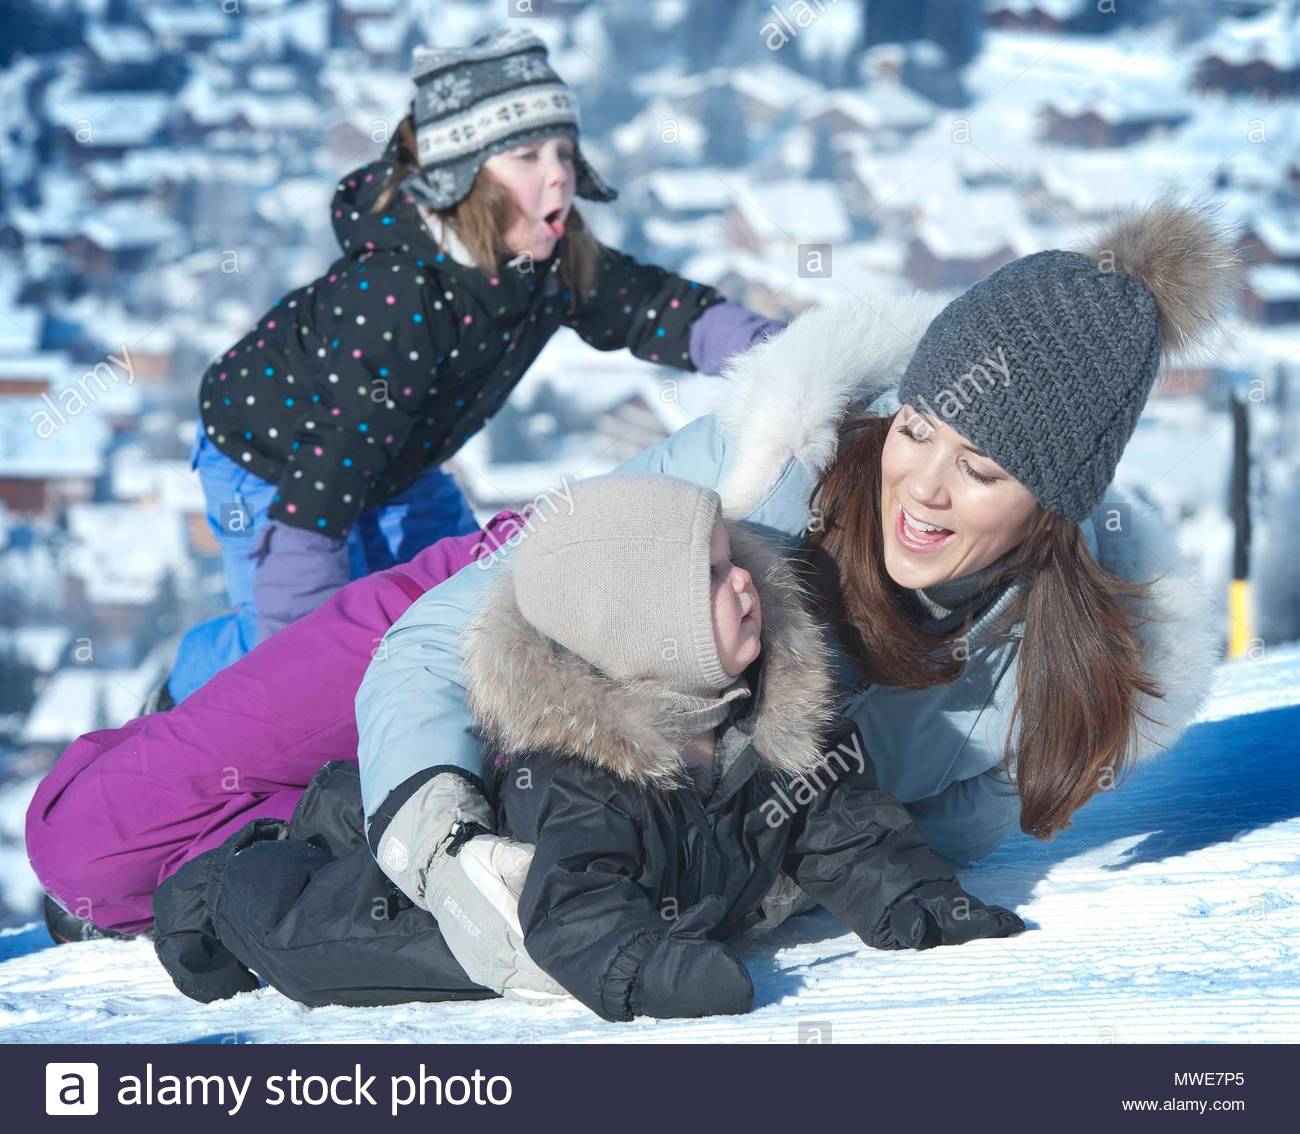 hrh-crown-princess-mary-hrh-prince-vincent-hrh-crown-princess-mary-and-hrh-crown-prince-frederik-with-their-children-prince-christian-princess-isabella-prince-vincent-and-princess-josephine-on-skiing-holiday-in-verbier-switzerland-photo-all-over-press-denmark-martin-hoien-MWE7P5.jpg